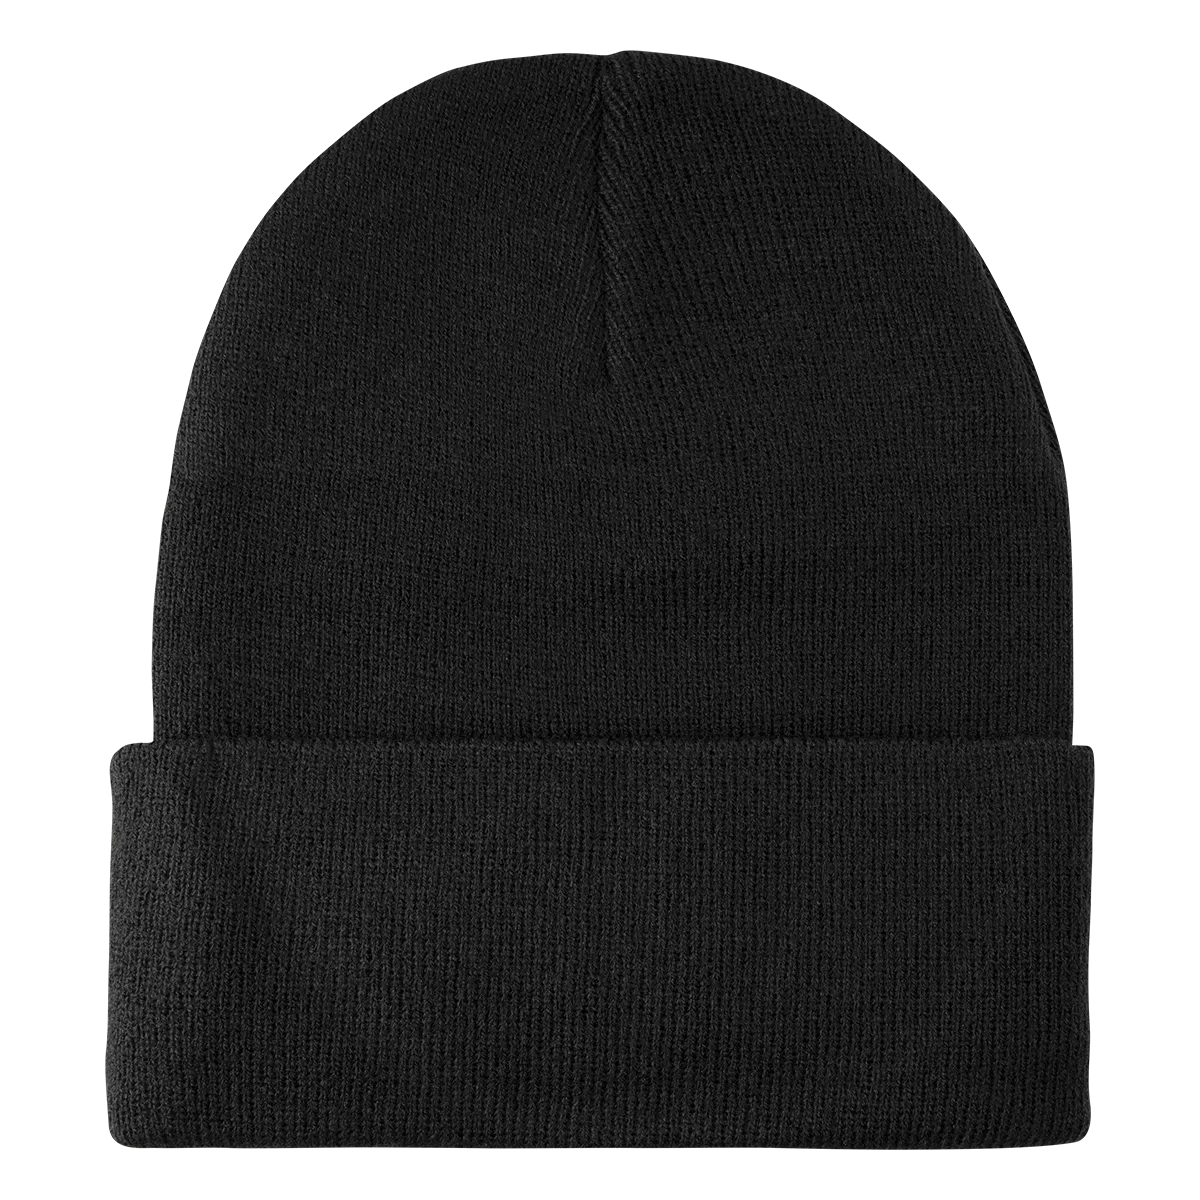 Call of Duty Beanie Hat "Stealth" Black Image 3